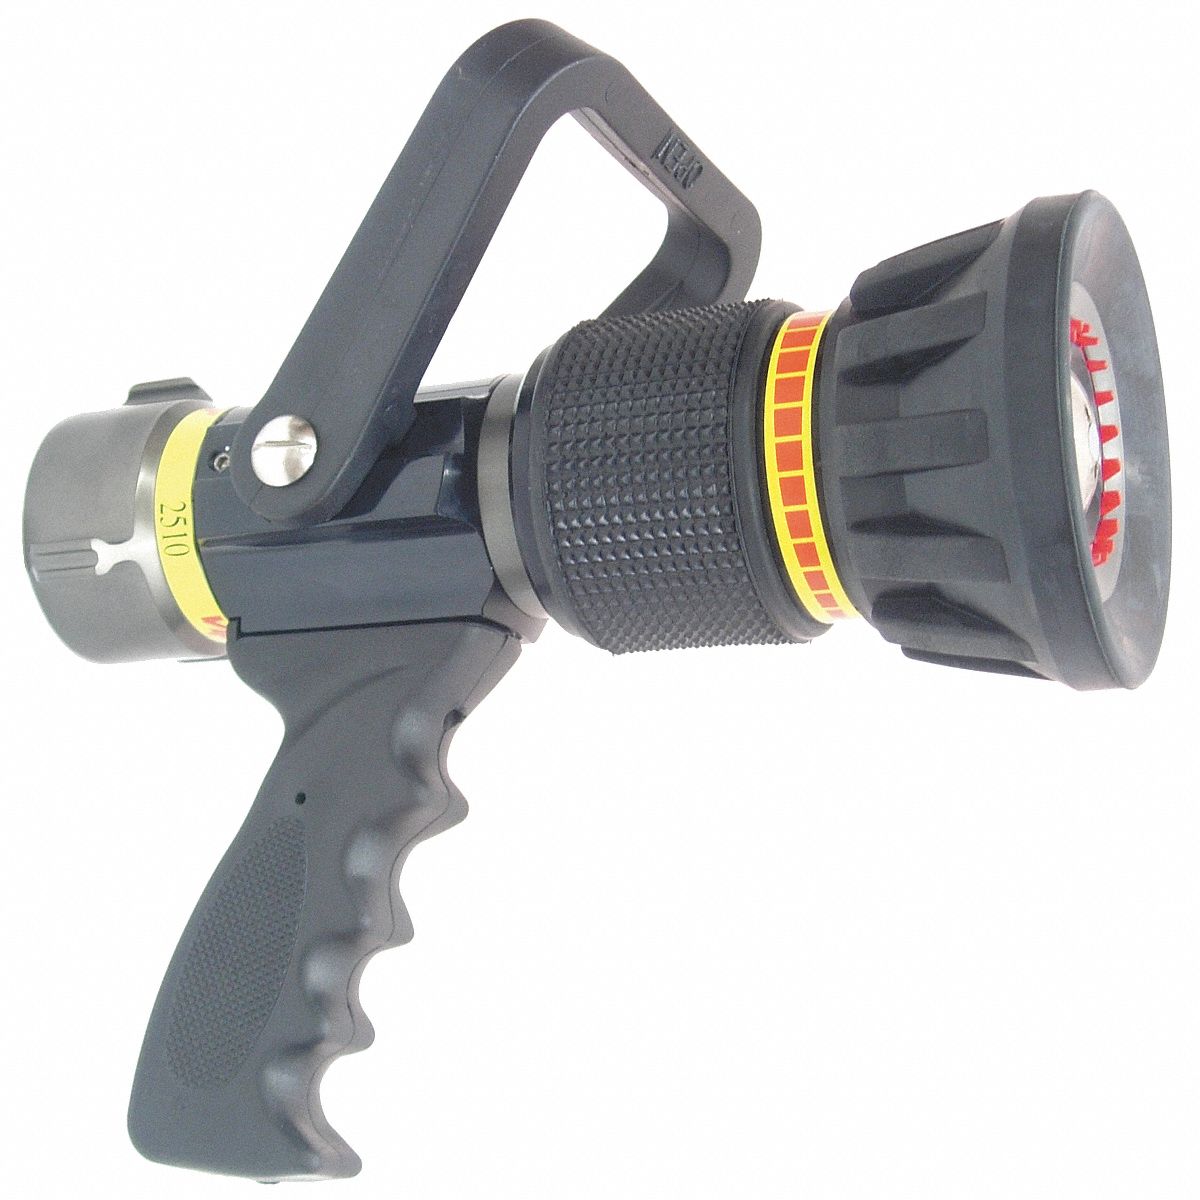 Fire Hose Nozzle: 1 1/2 in Inlet Size, Black, Aluminum, 95 gpm Flow Rate, Water, NST